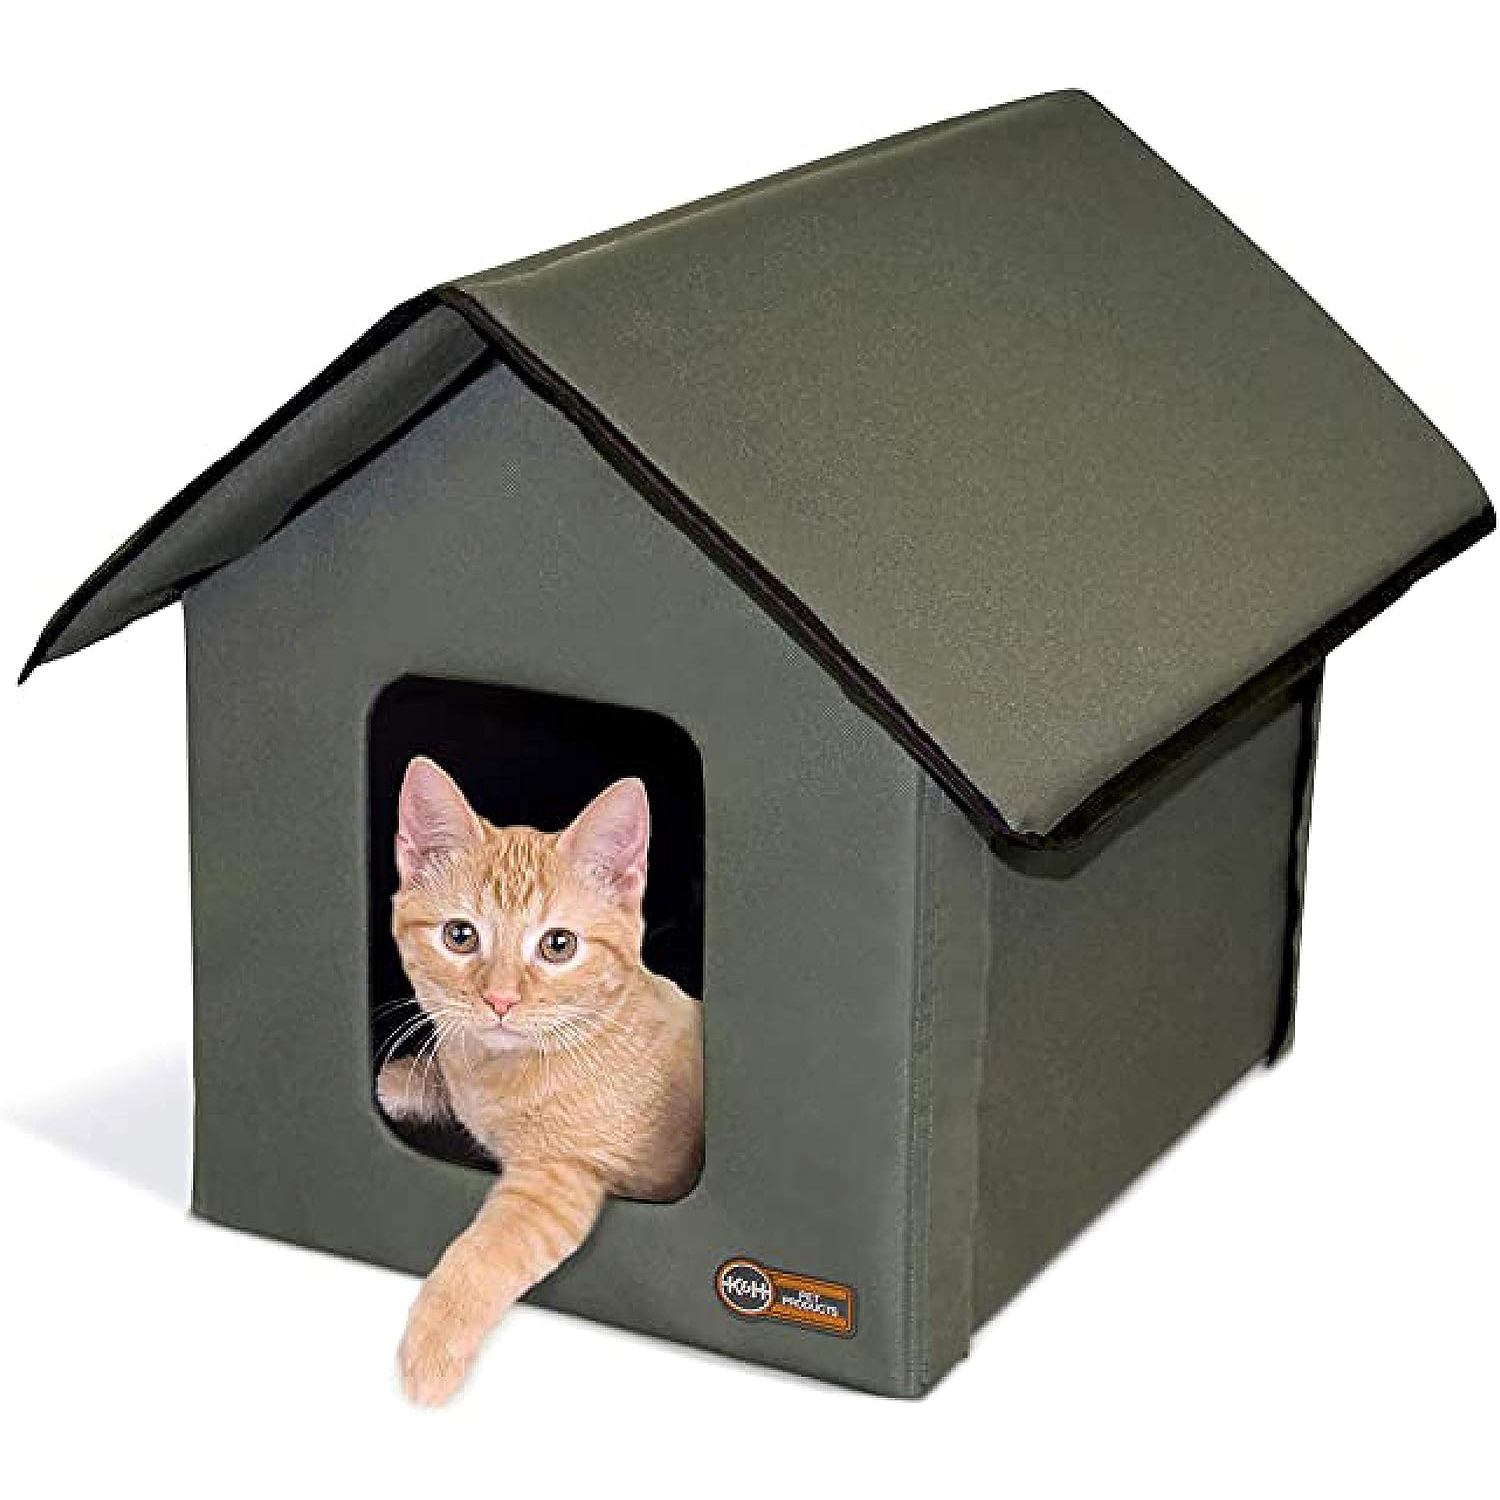 K&H Pet Products Outdoor Kitty House, Outdoor Cat House for Outside Community Cats, Strays, and Ferals, Insulated Shelter, Cold Weather House for Winter, 19 X 22 X 17 Inches (Unheated) Olive new